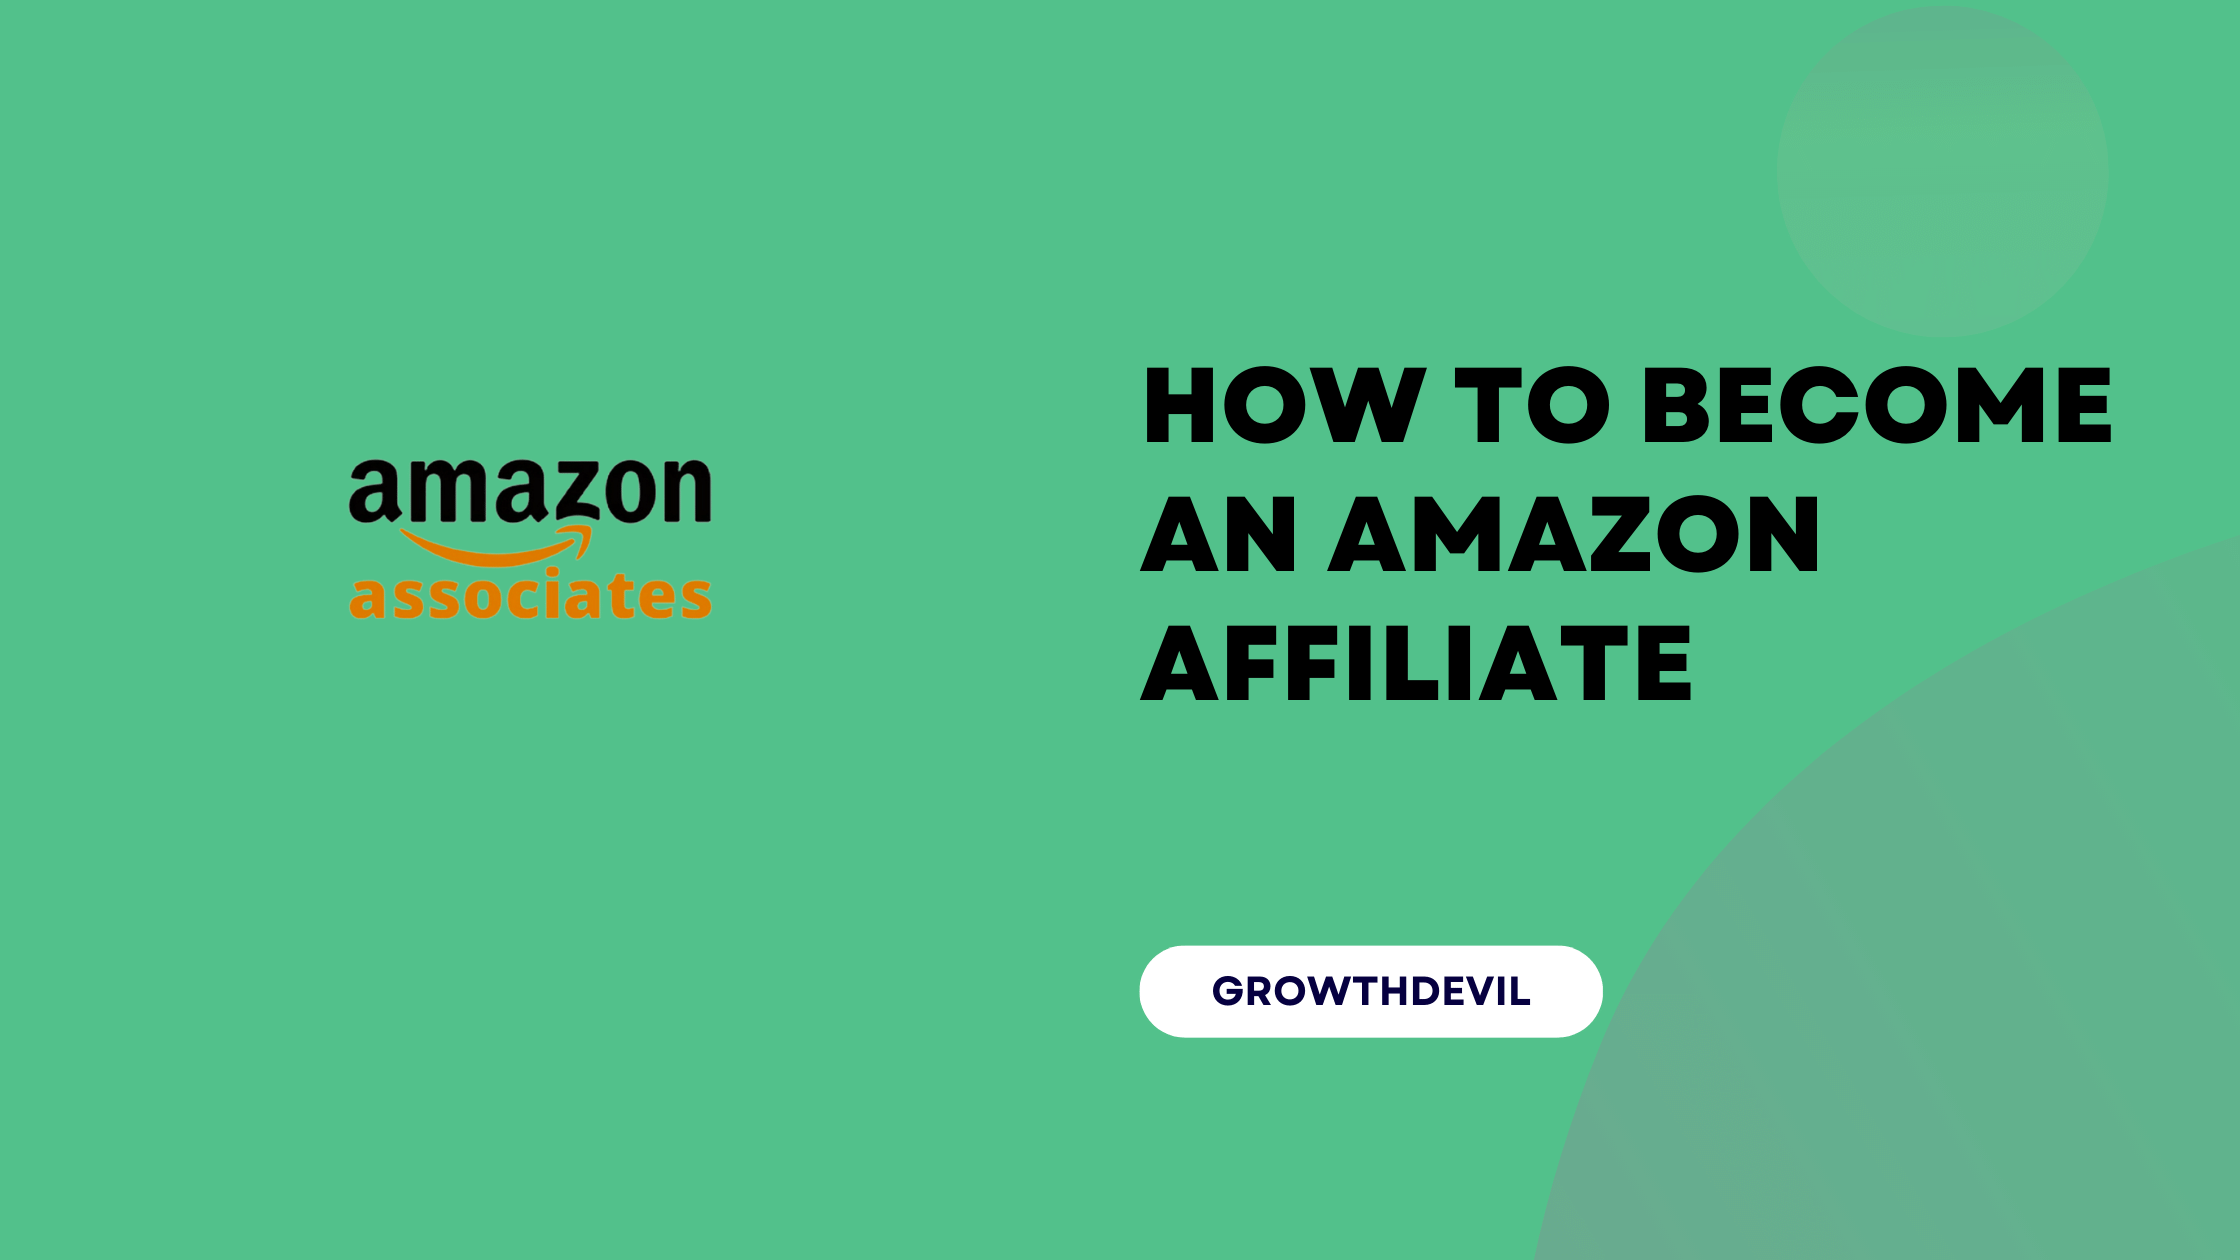 How To Become An Amazon Affiliate - GrowthDevil